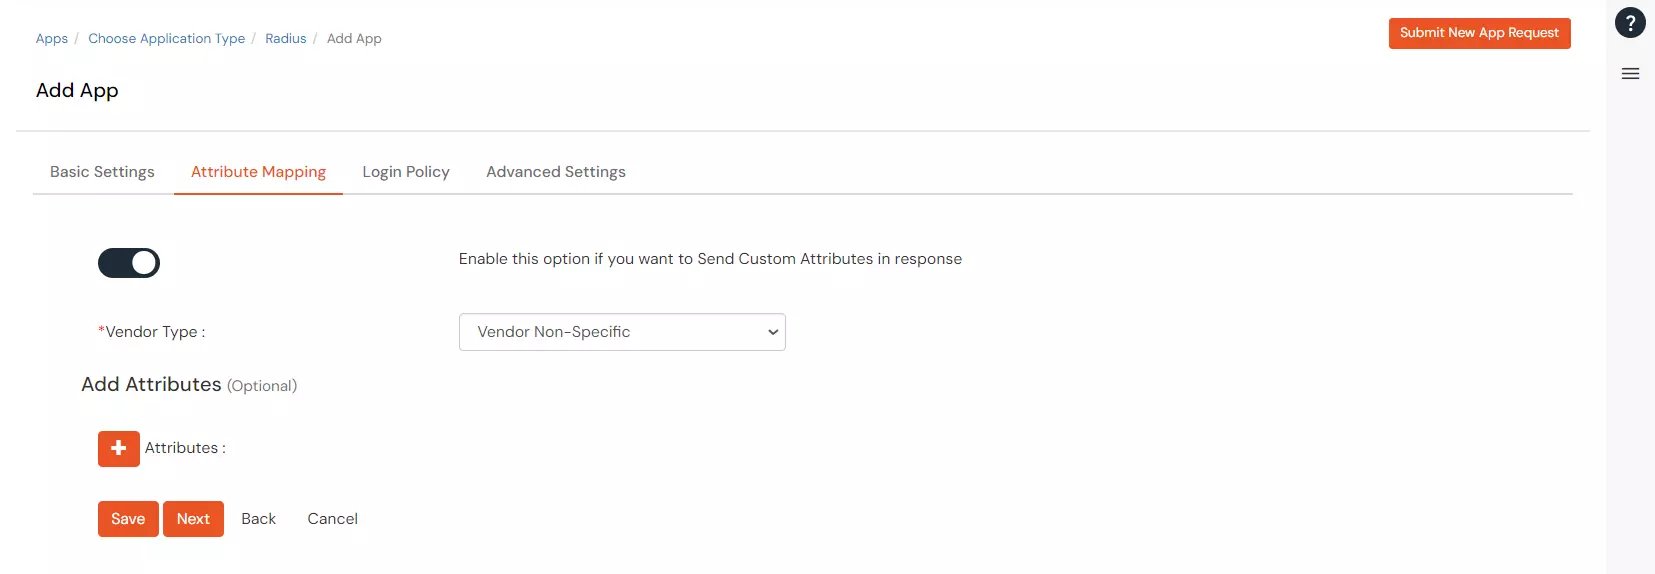 2FA Two-Factor radius authentication for Citrix Gateway : Select your Radius Client